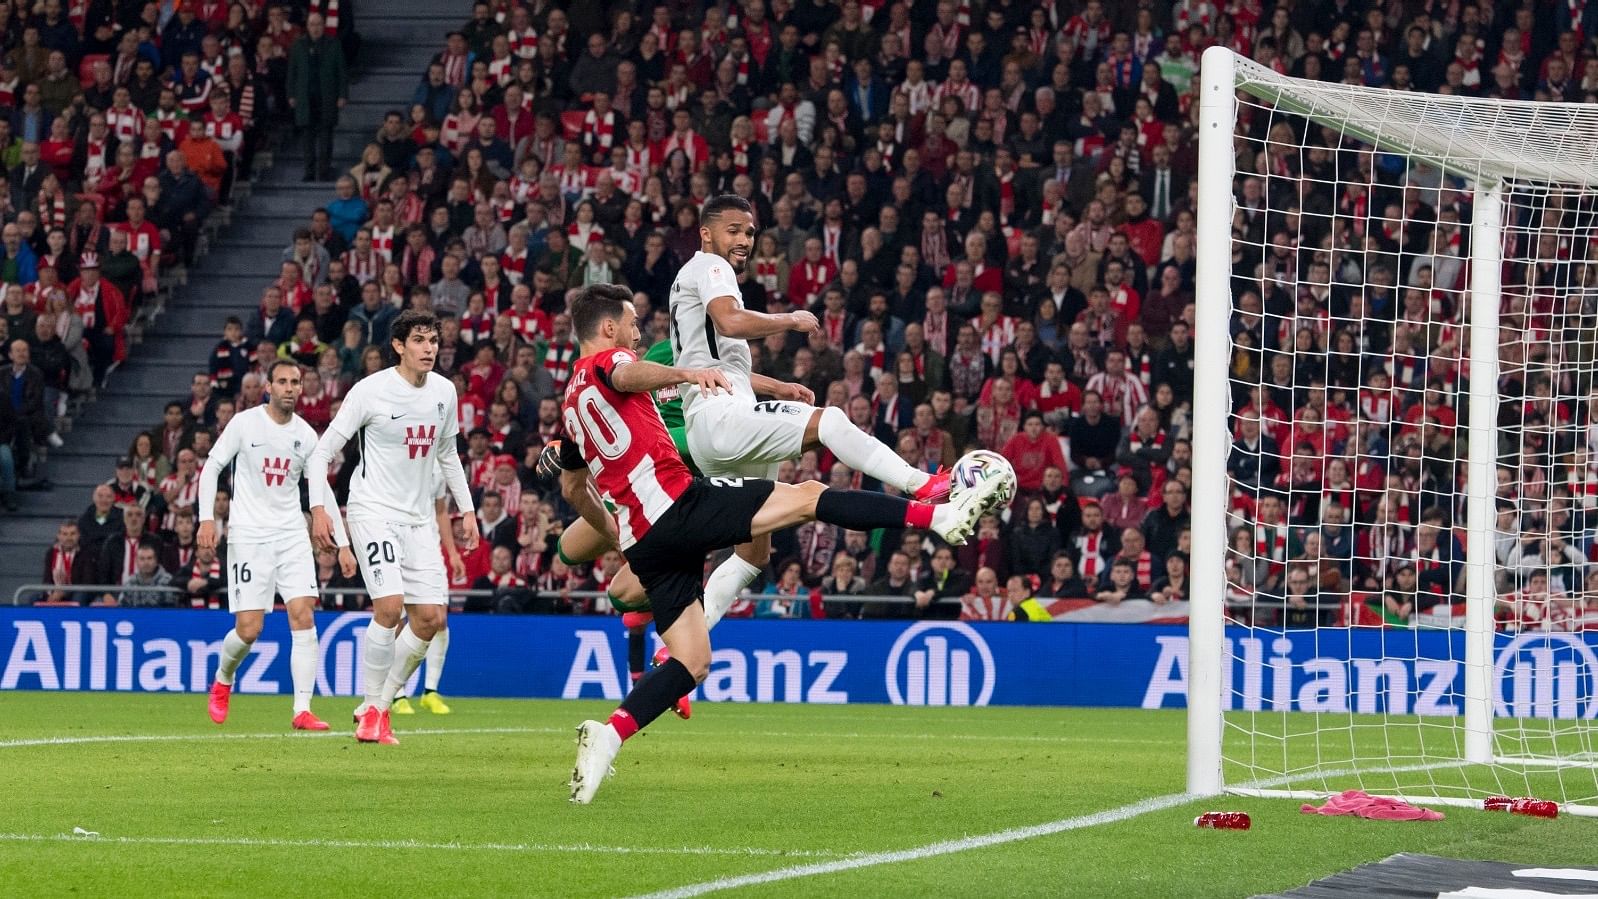 Athletic Bilbao beat Granada 1-0 in the first leg of the semifinals on Wednesday, 12 February.